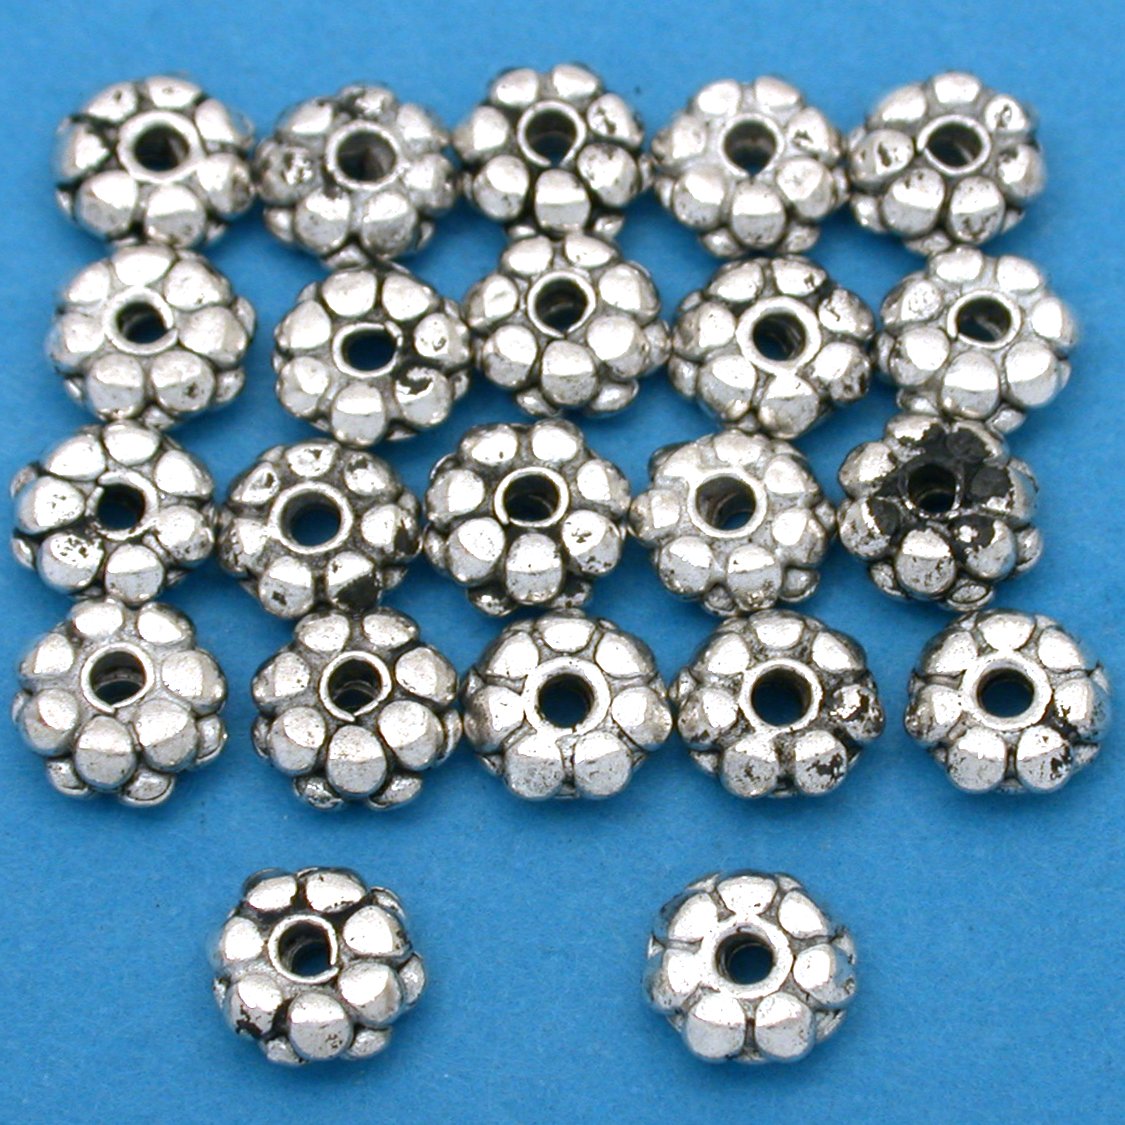 Bali Spacer Flower Antique Silver Plated Beads 7.5mm 15 Grams 20Pcs Approx.